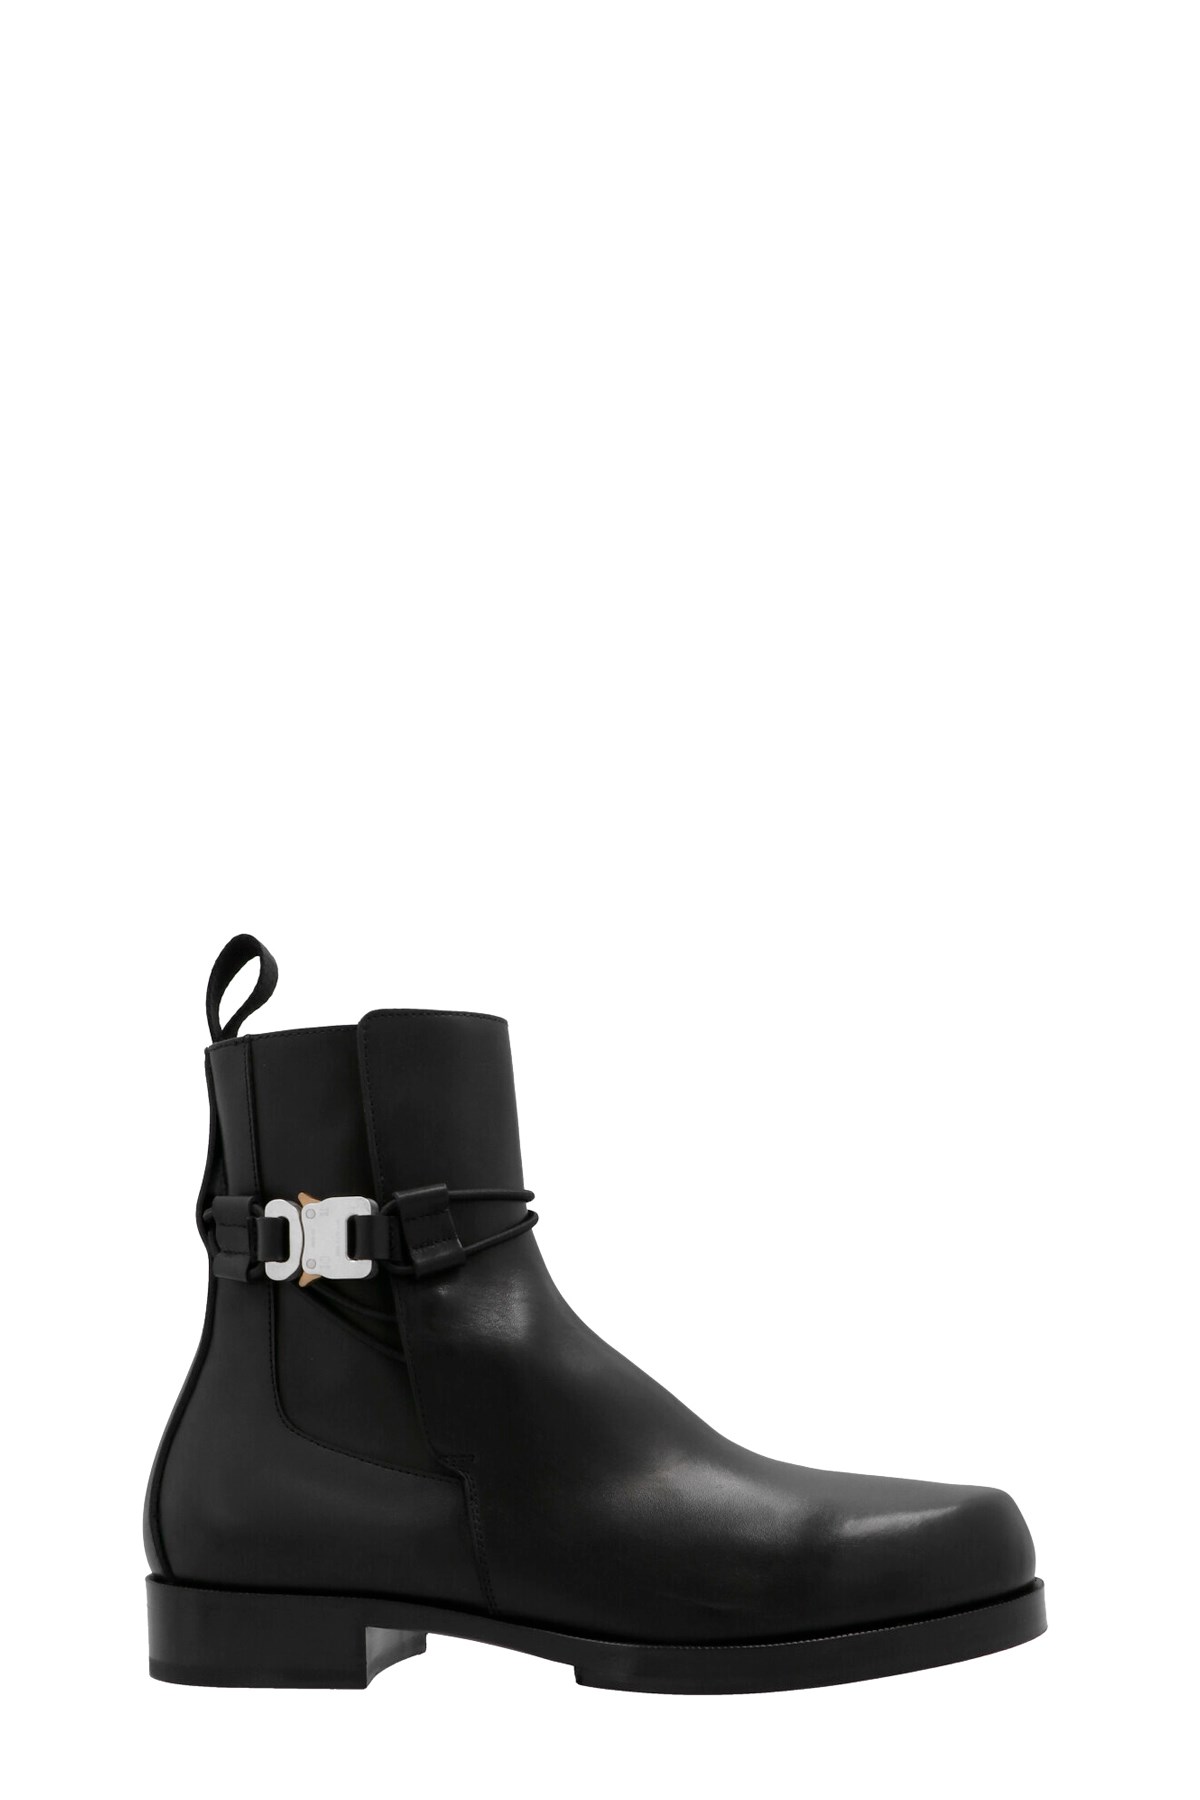 1017-ALYX-9SM ‘Buckle’ Chelsea Boots